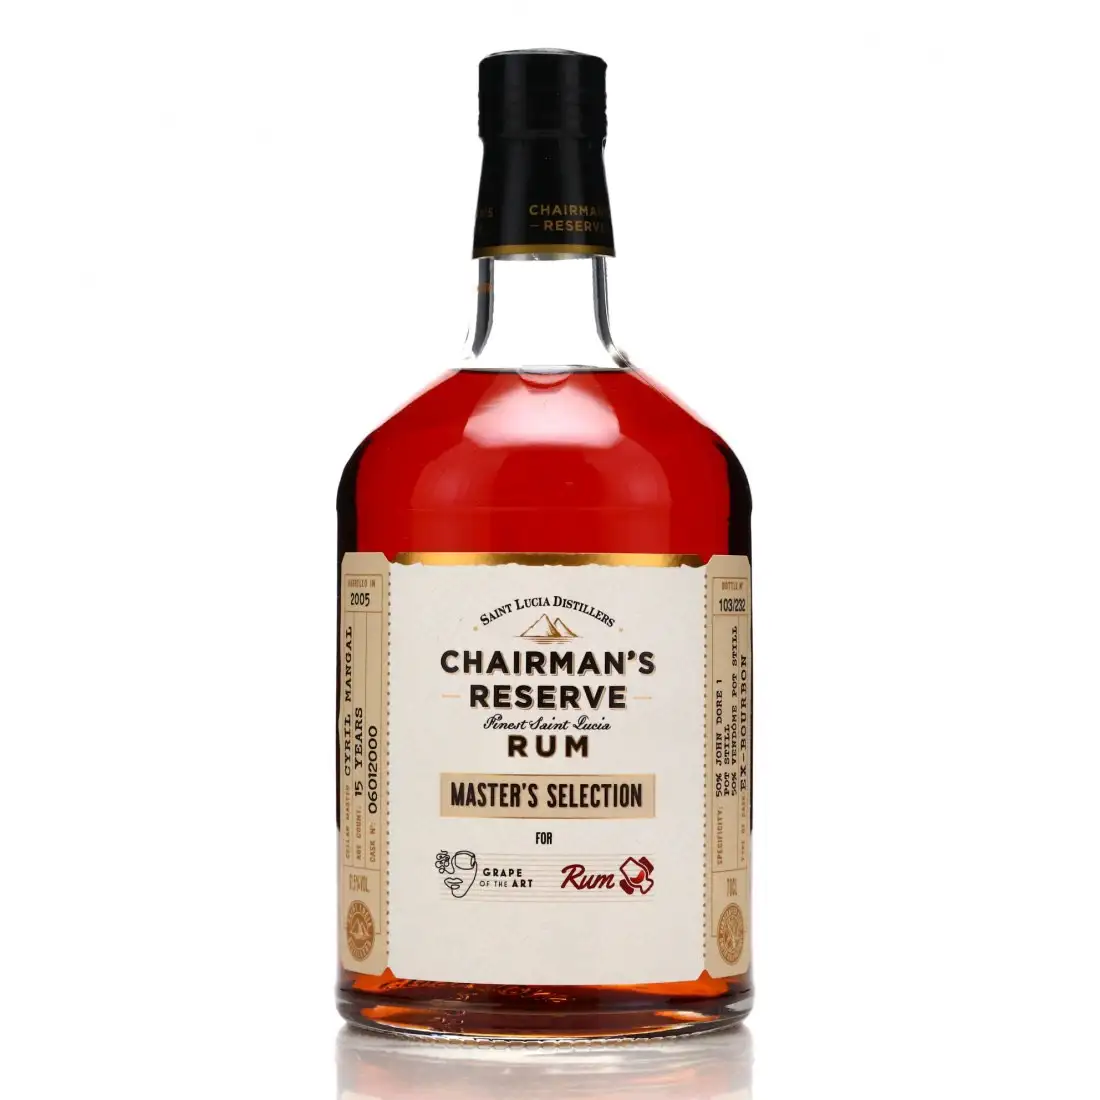 Image of the front of the bottle of the rum Chairman‘s Reserve Master's Selection (Grape of the Art & RumX)